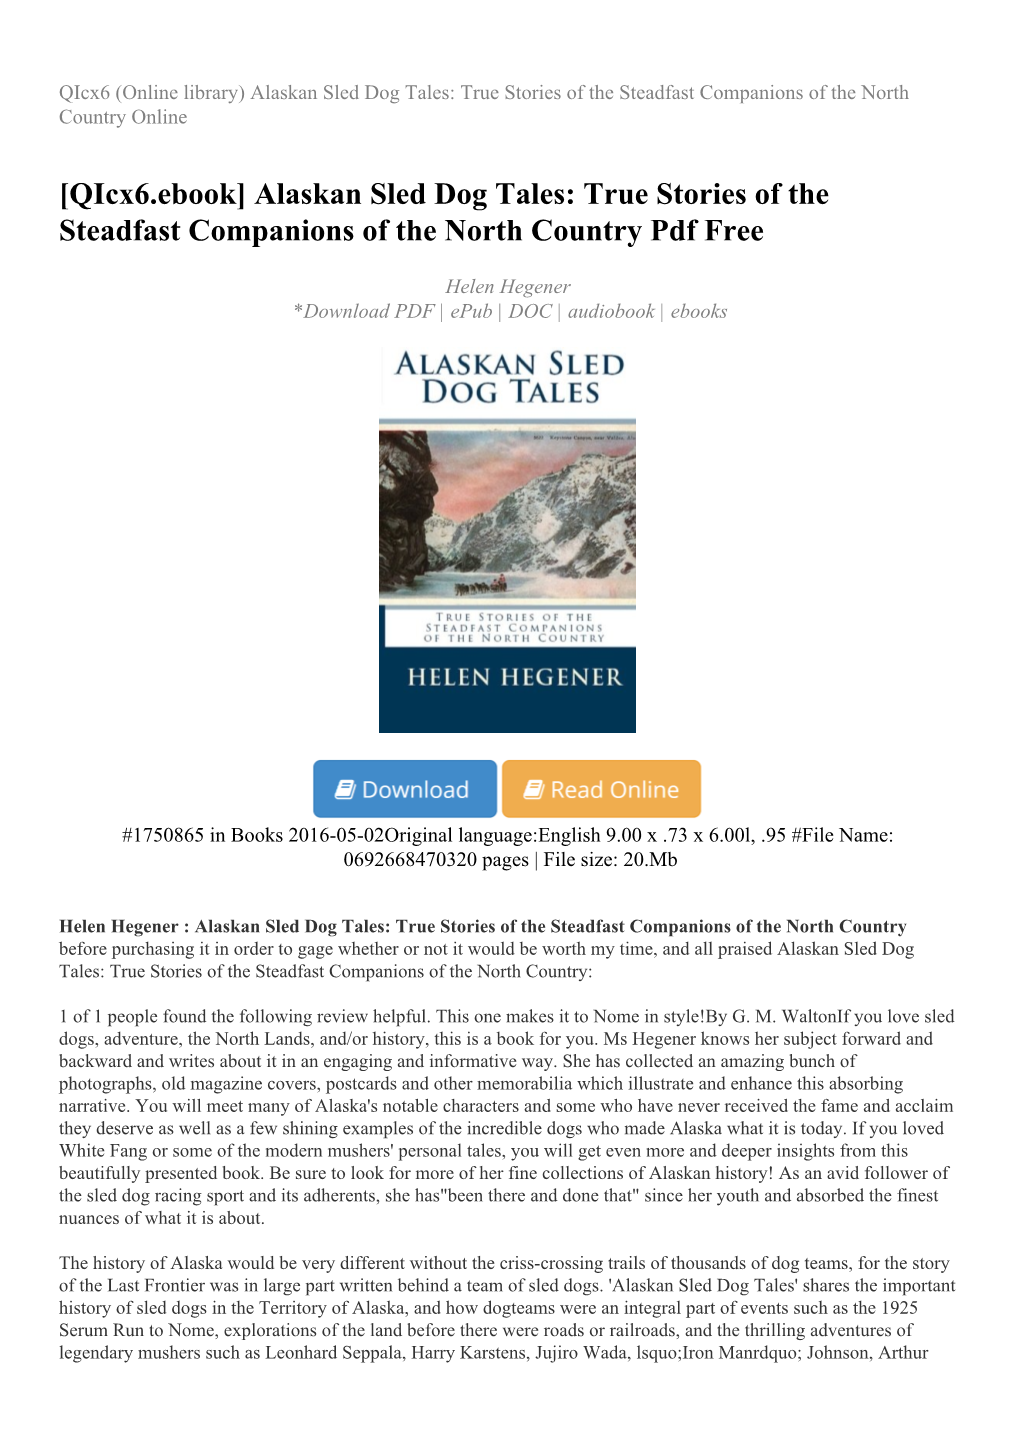 Alaskan Sled Dog Tales: True Stories of the Steadfast Companions of the North Country Online